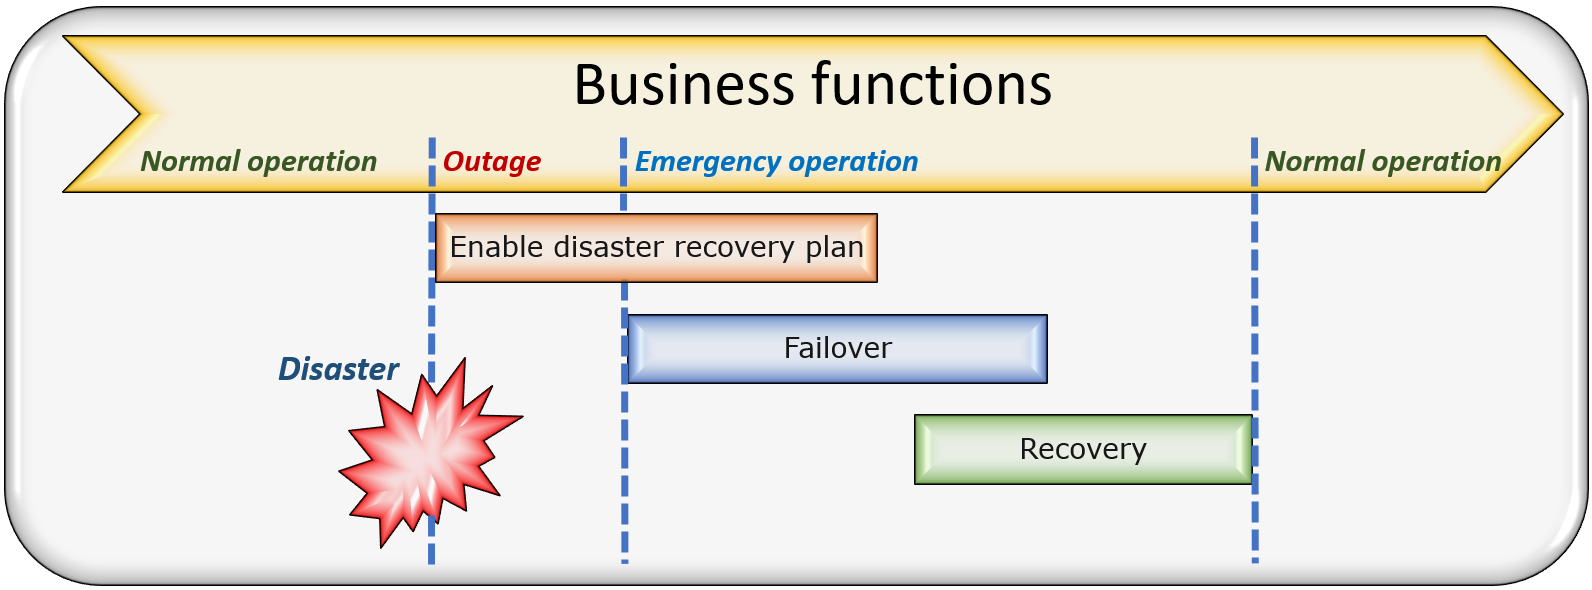 Image: Process flow - Business functions - normal operation - outage - emergency operation - enable disaster recovery plan, failover and recovery.